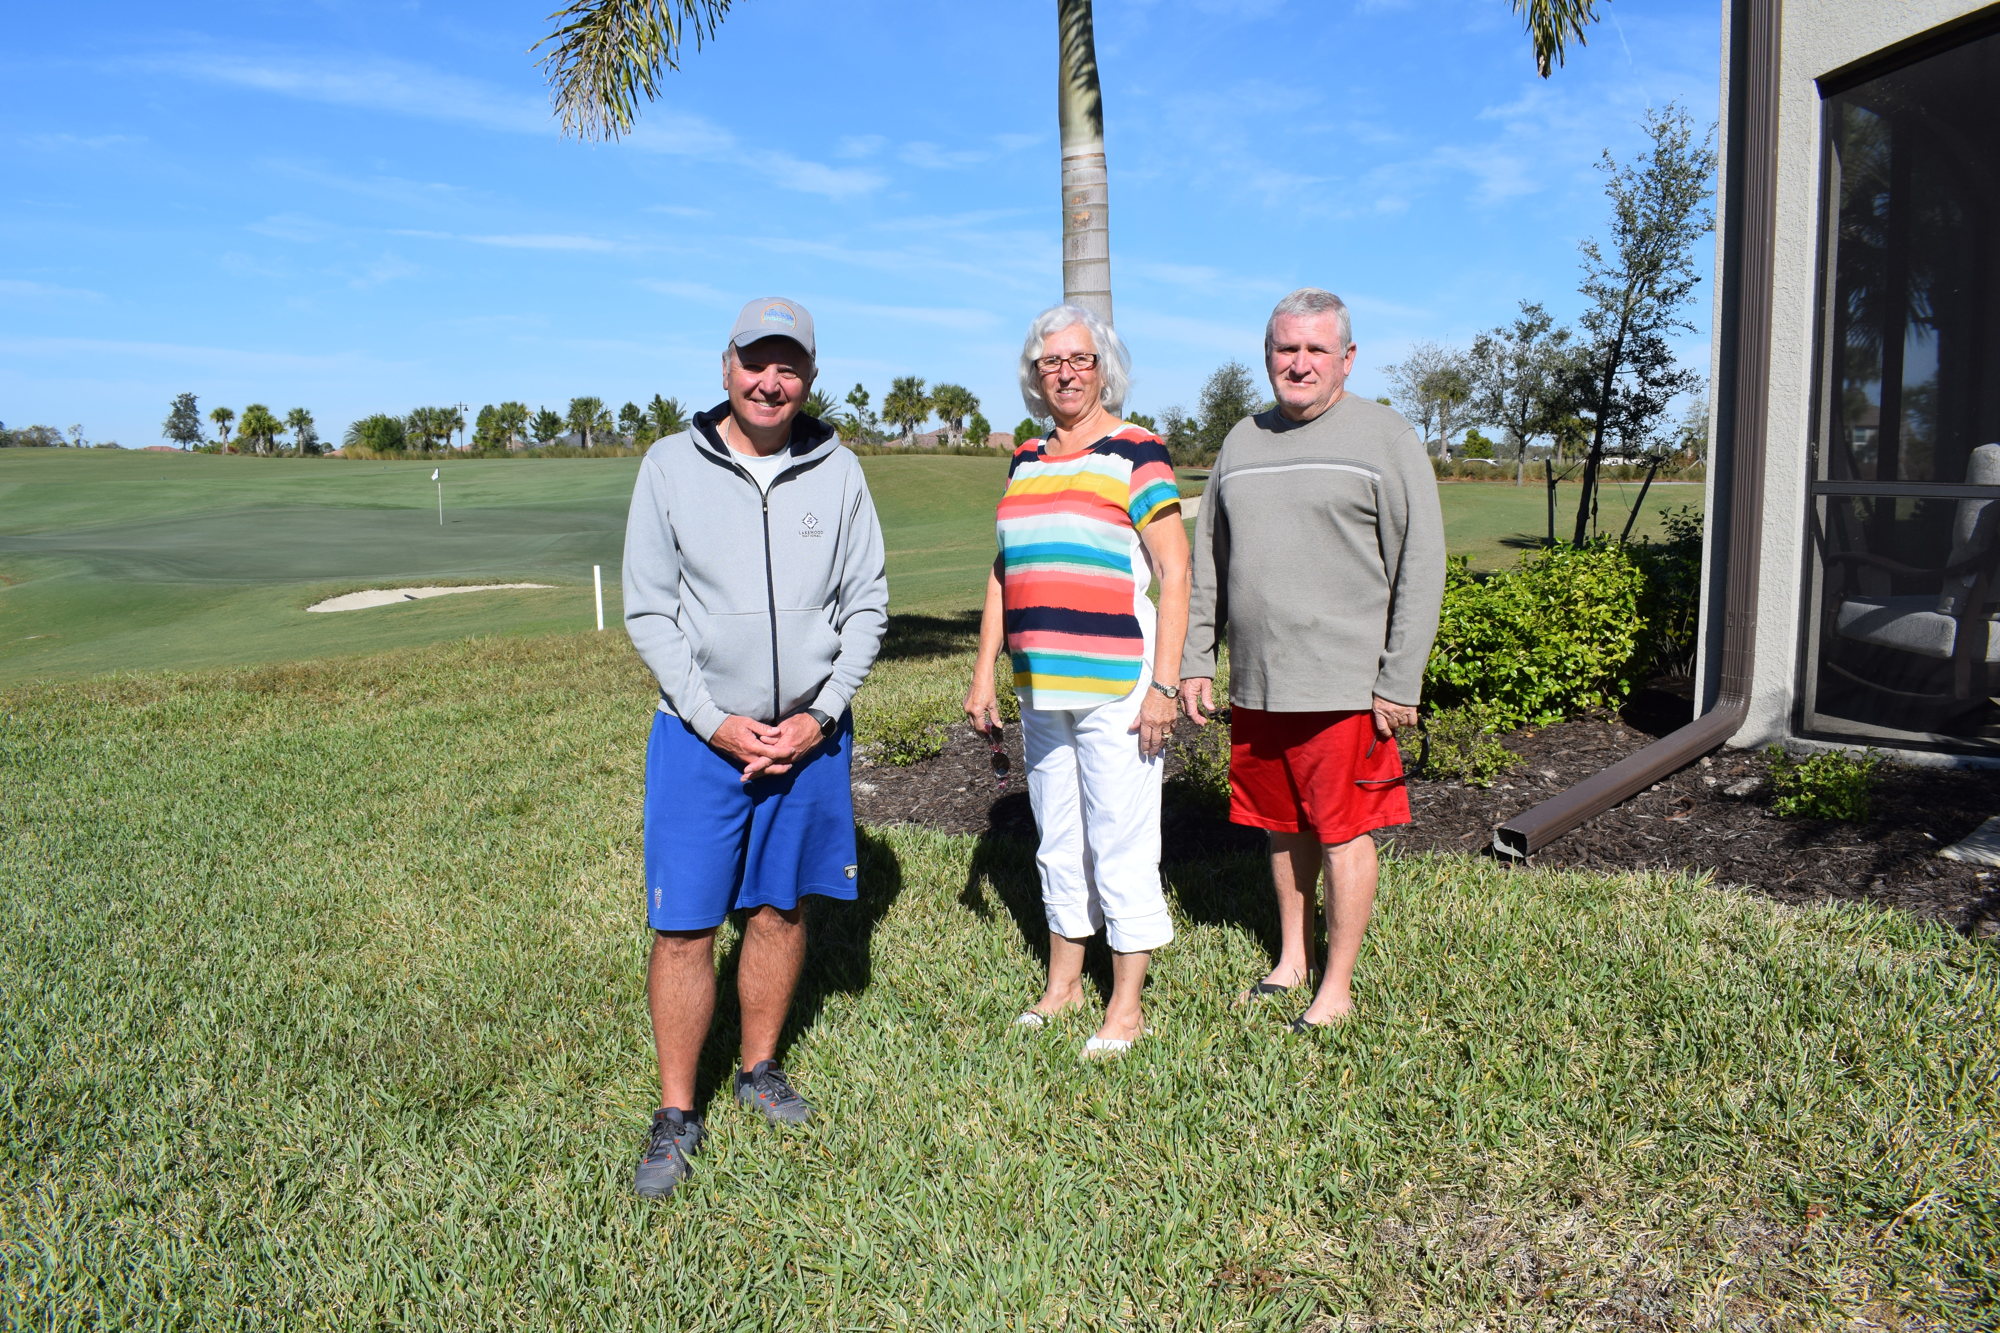 Bob NieDerpruem and Pat and Wayne Ryan have homes on the Lakewood National Golf Course they made available to the pros.